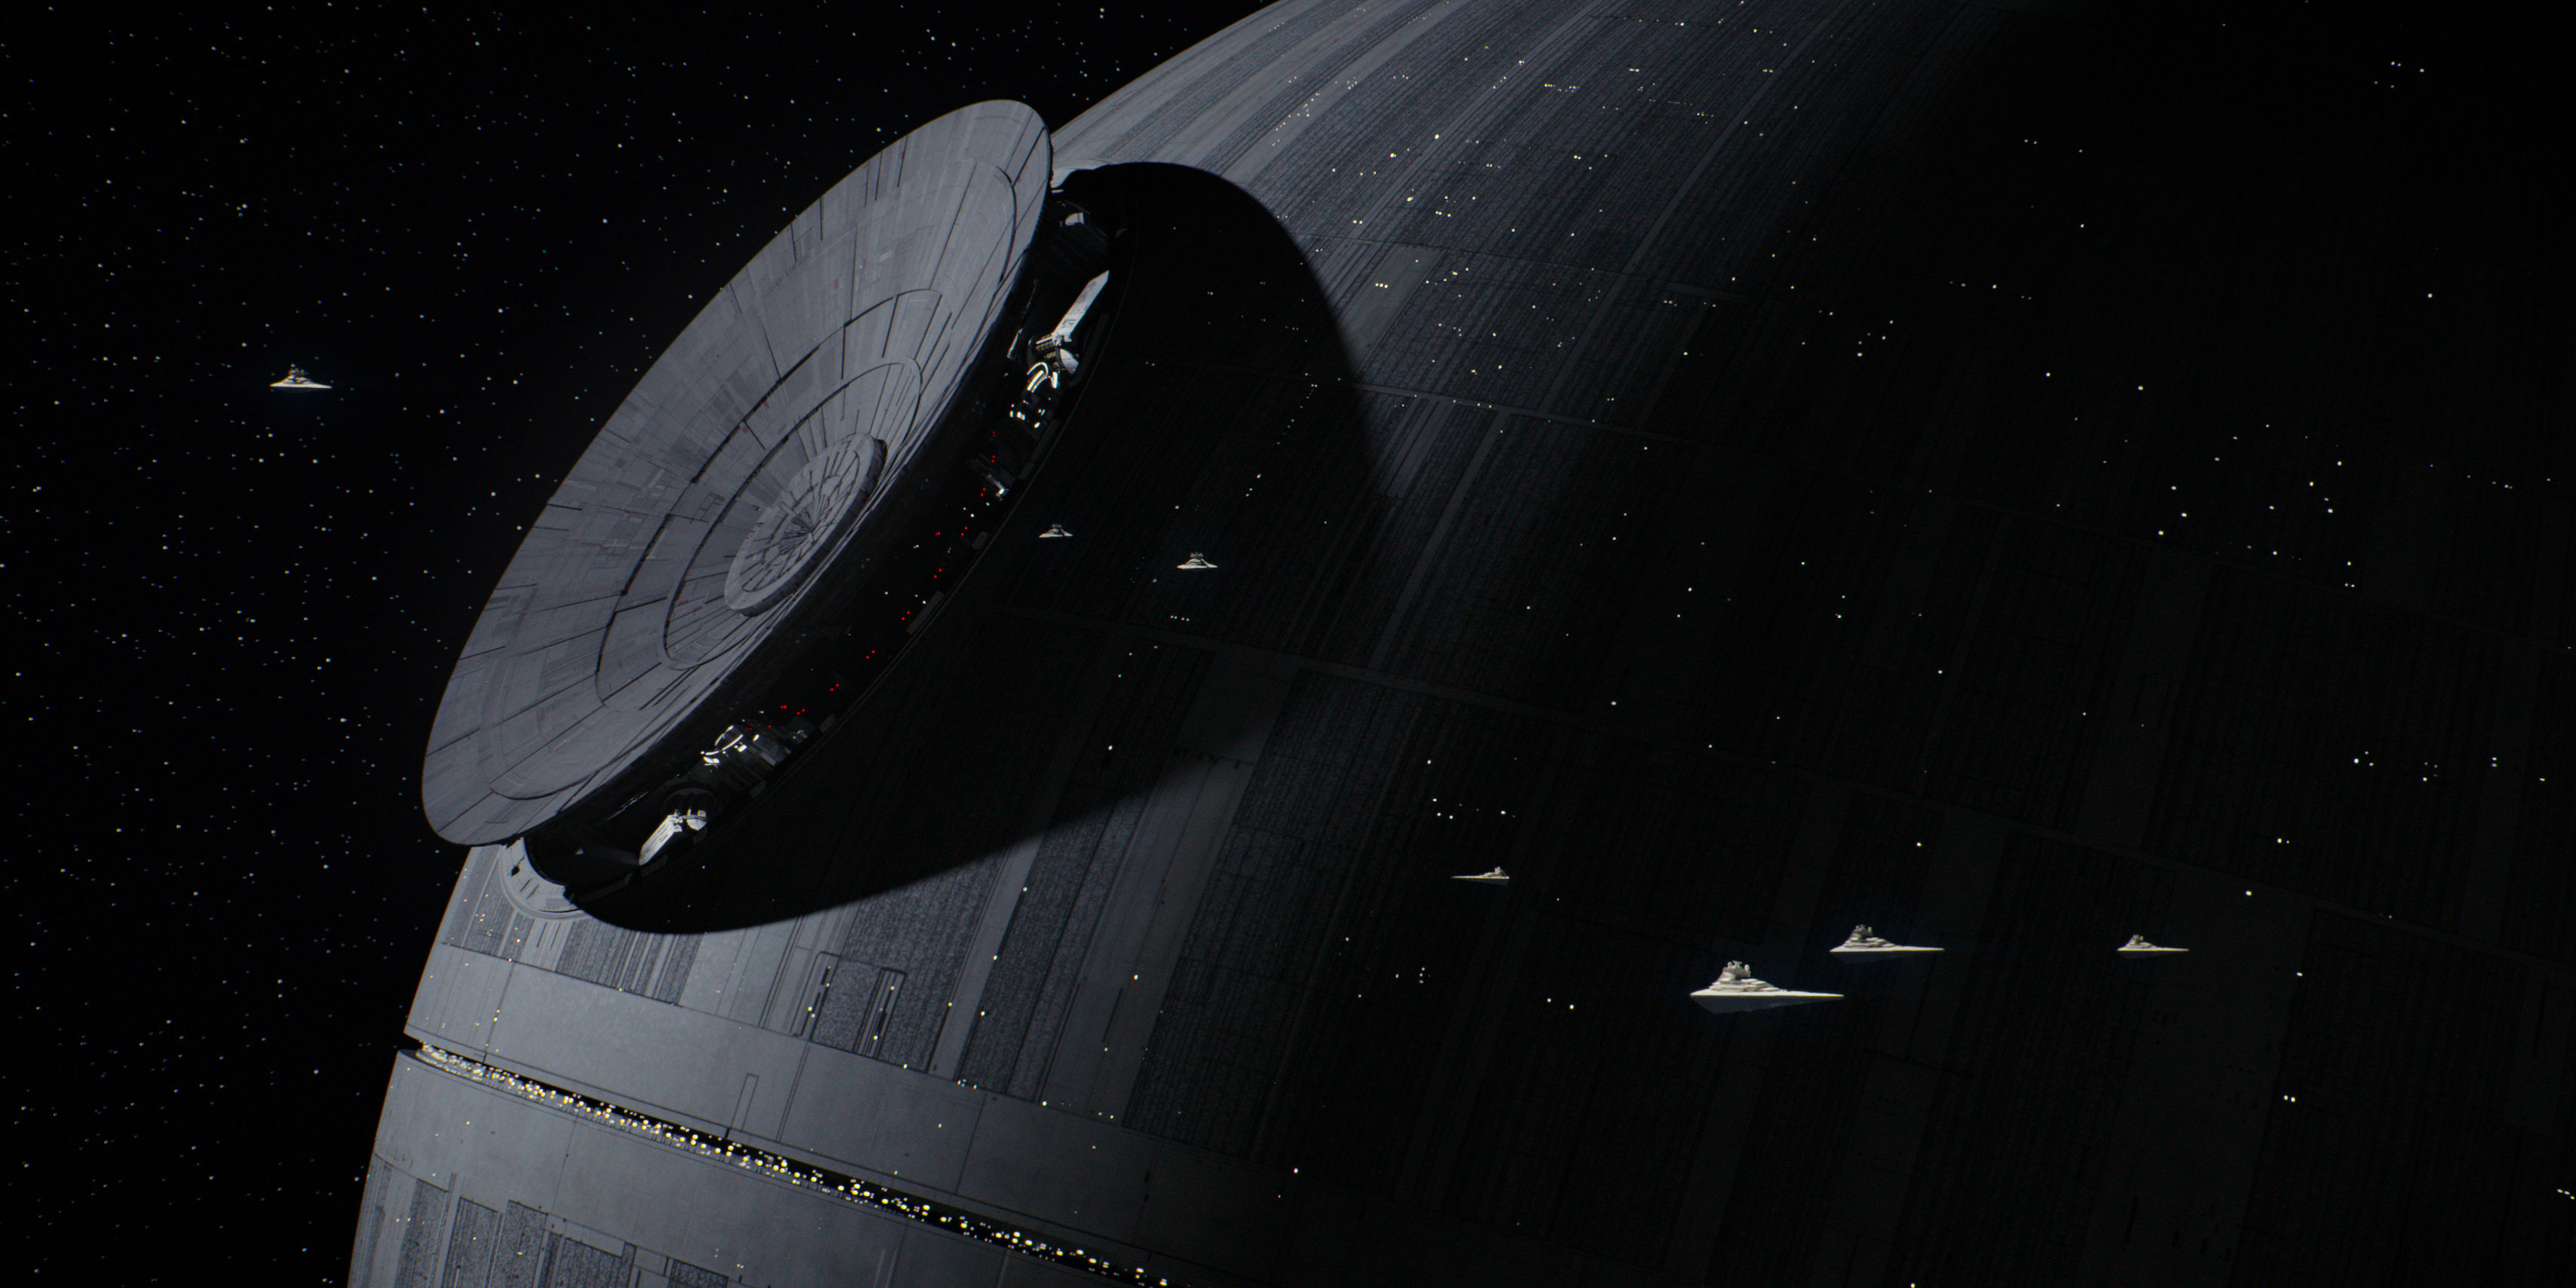 rogue one: a star wars story, movie, death star, star wars High Definition image